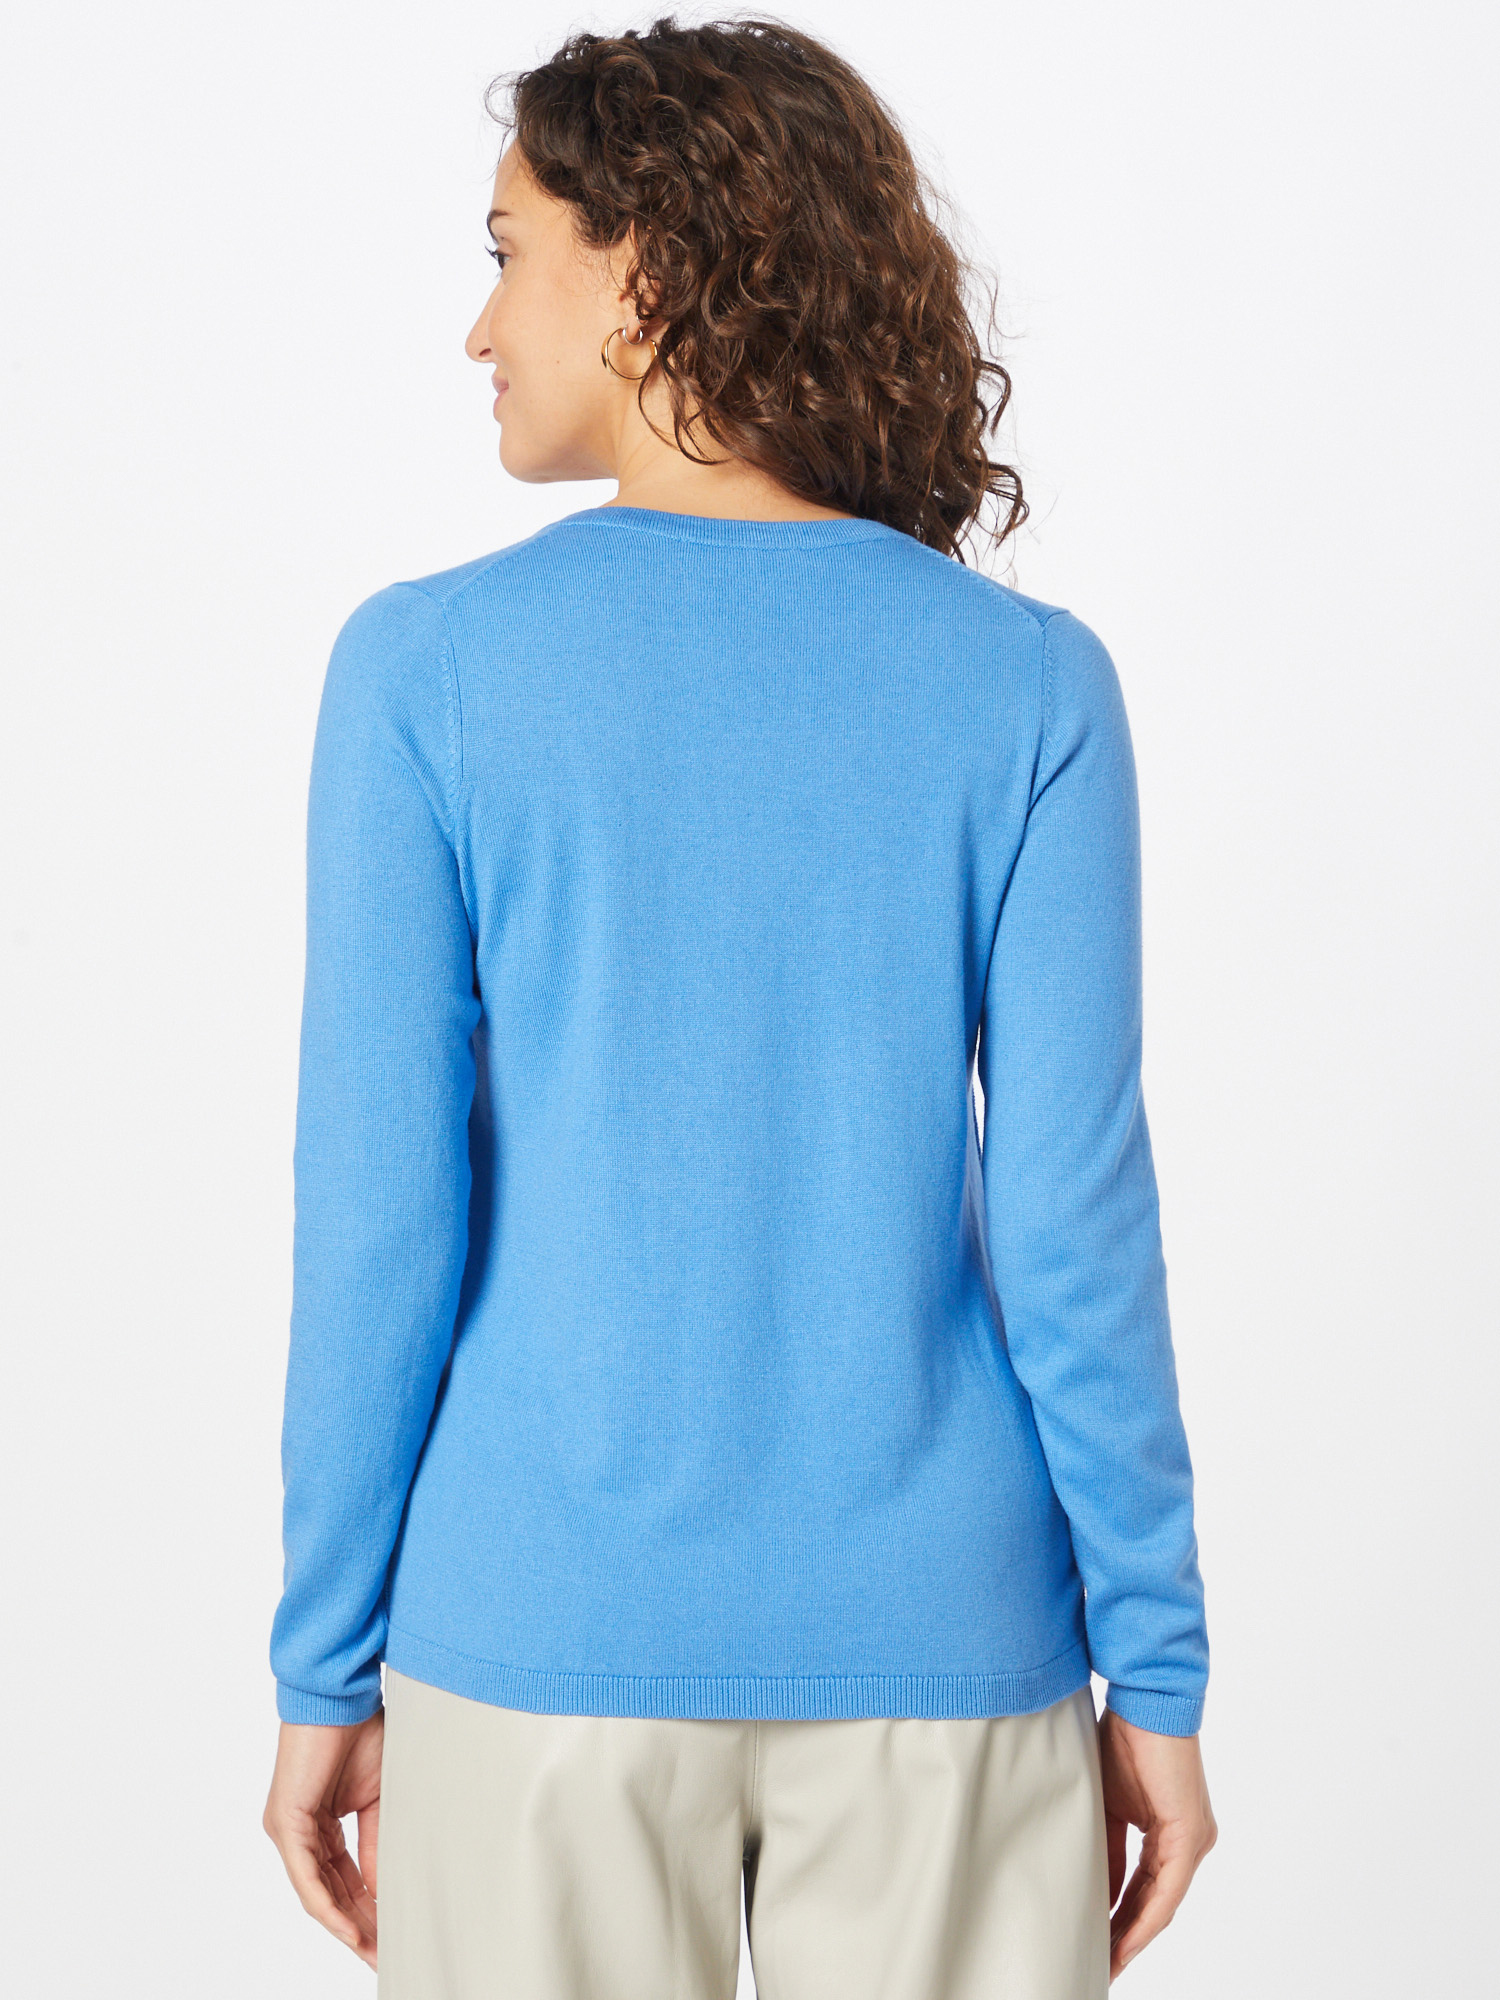 EDC BY ESPRIT Pullover in Himmelblau 